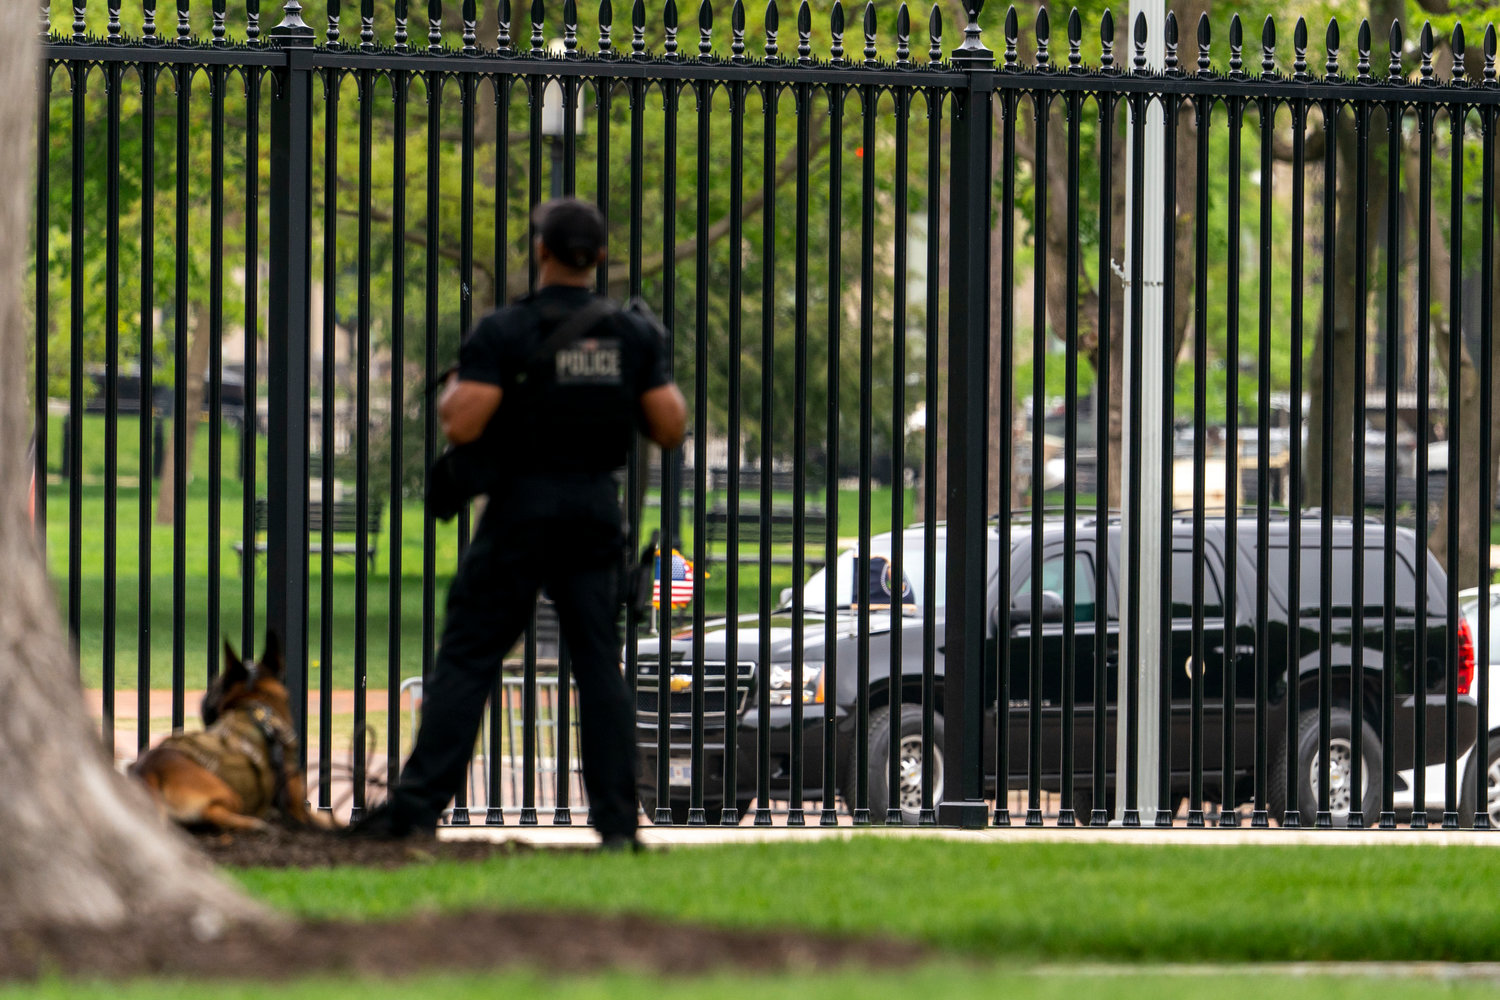 A motorcade with President Joe Biden arrives at the White House in Washington, Monday, April 25, 2022, after Biden spent the weekend in Wilmington, Del. (AP Photo/Andrew Harnik)